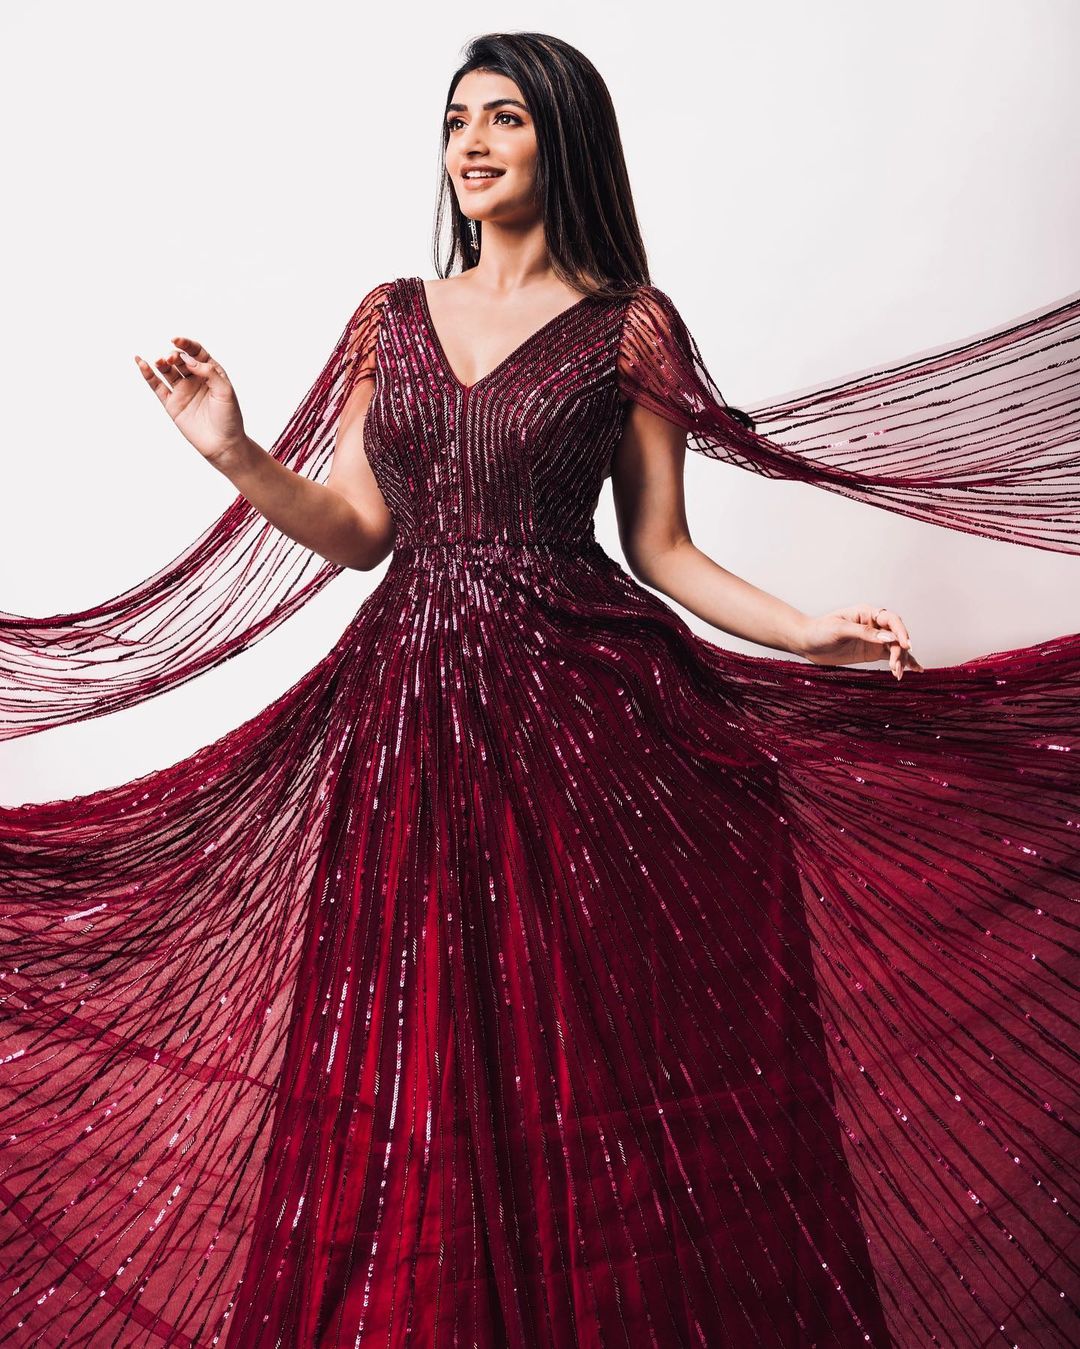 Fabulous Sreeleela In Marron Glittery Gown Outfit Sreeleela Beautiful and Elegant Outfit Looks